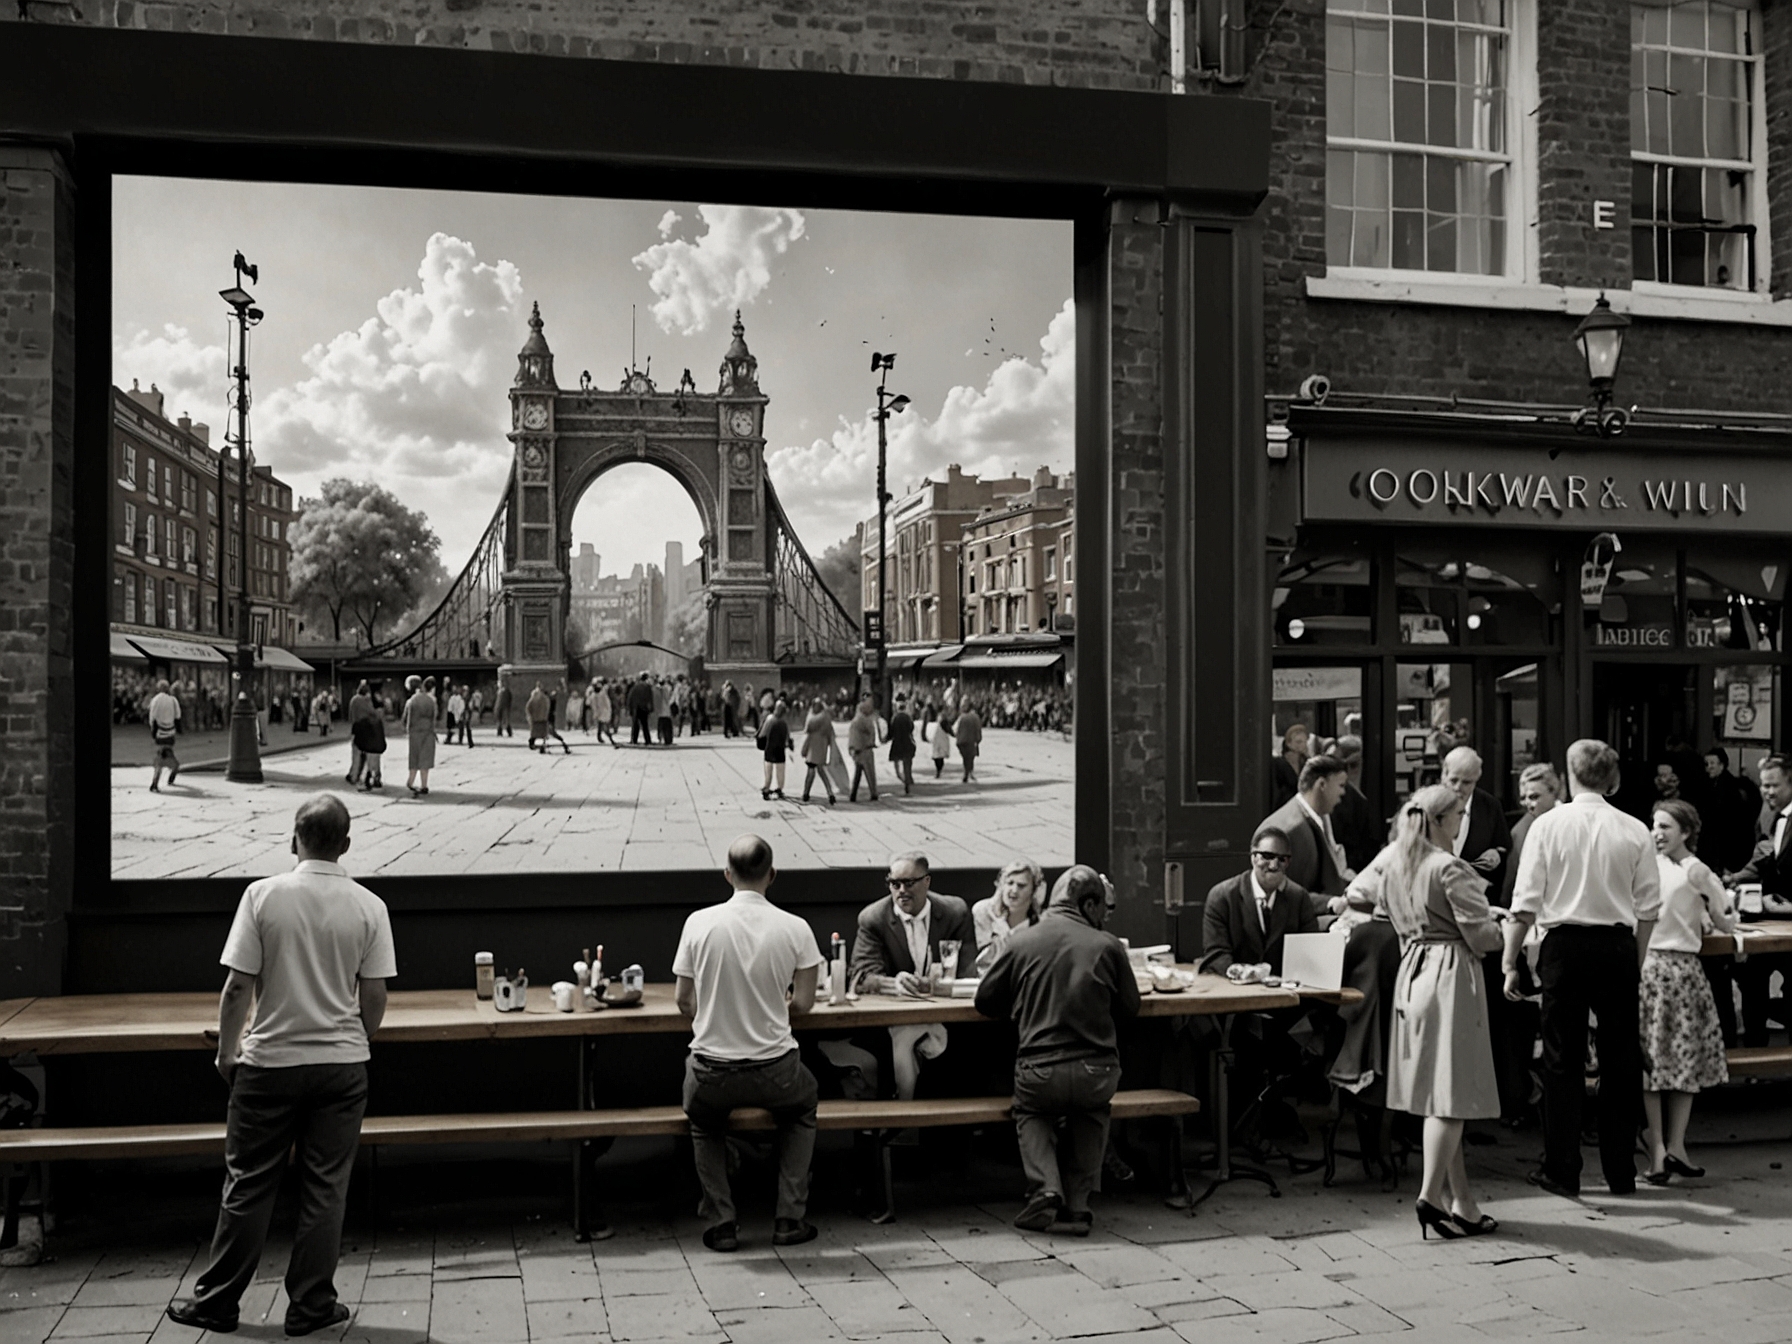 A picturesque view of Flat Iron Square in Southwark, featuring a giant outdoor screen, food vendors, and football fans gathering to watch a live match against the historical railway arches backdrop.